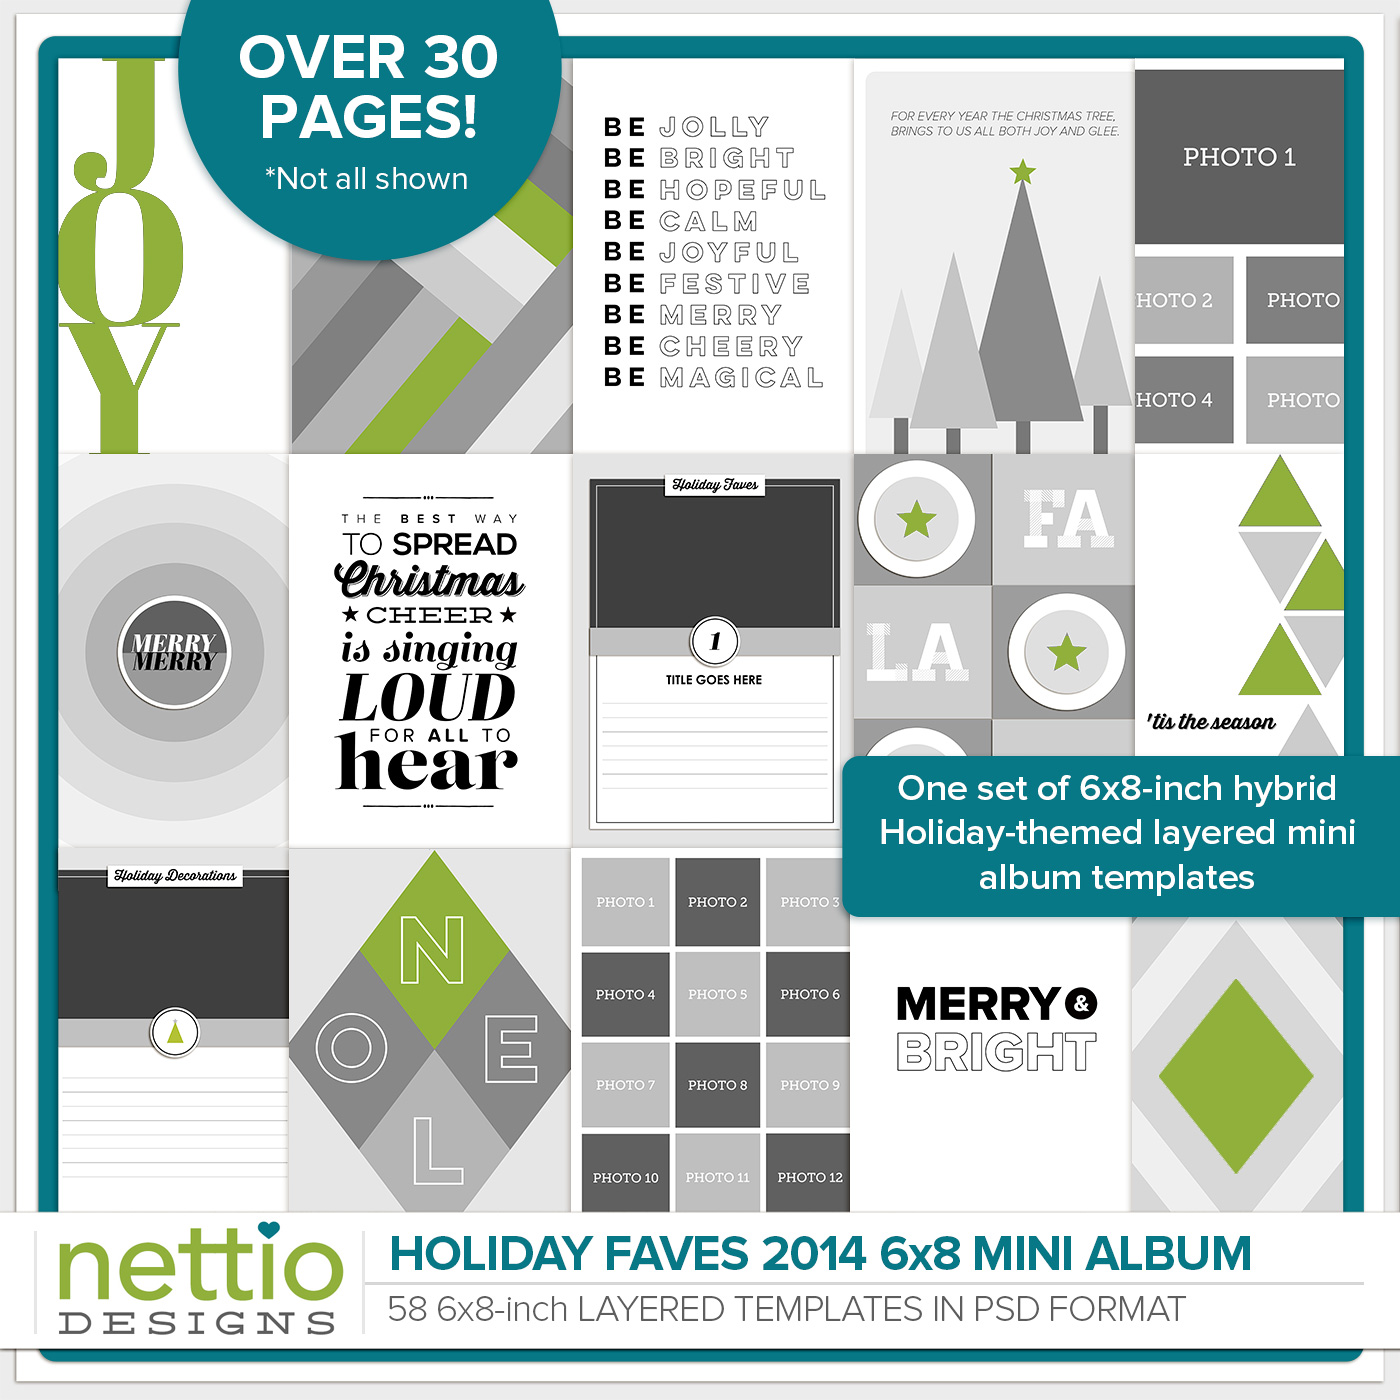 nettiodesigns_HolidayFavesMini14-preview